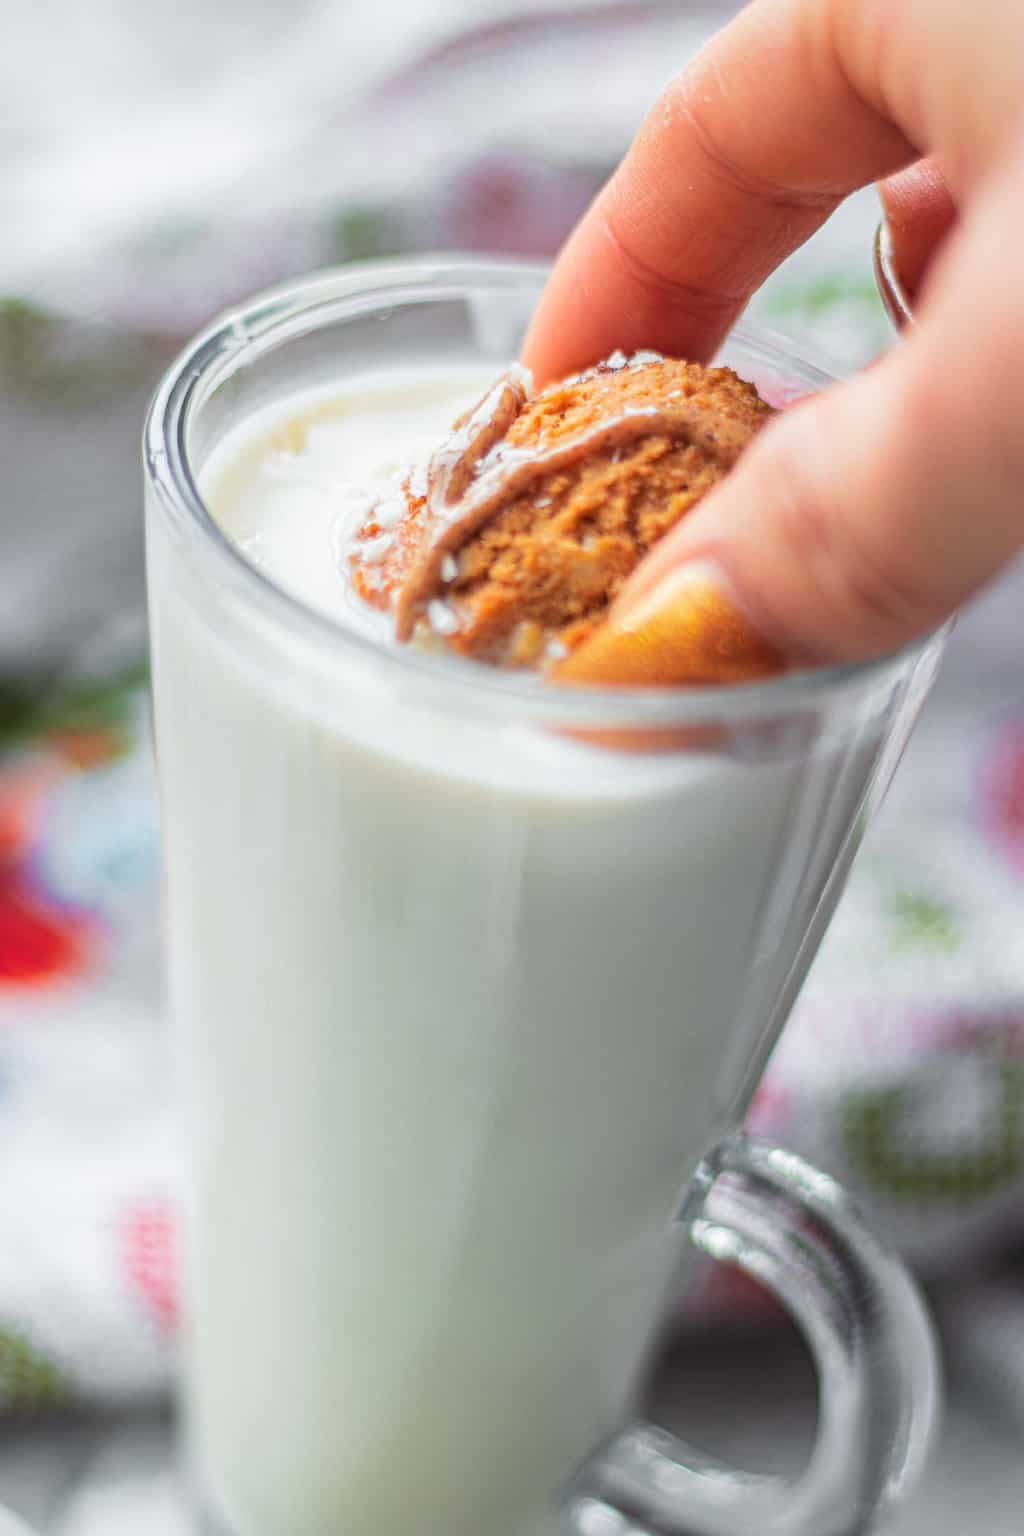 Vegan almond cookie being dipped into a glass of milk